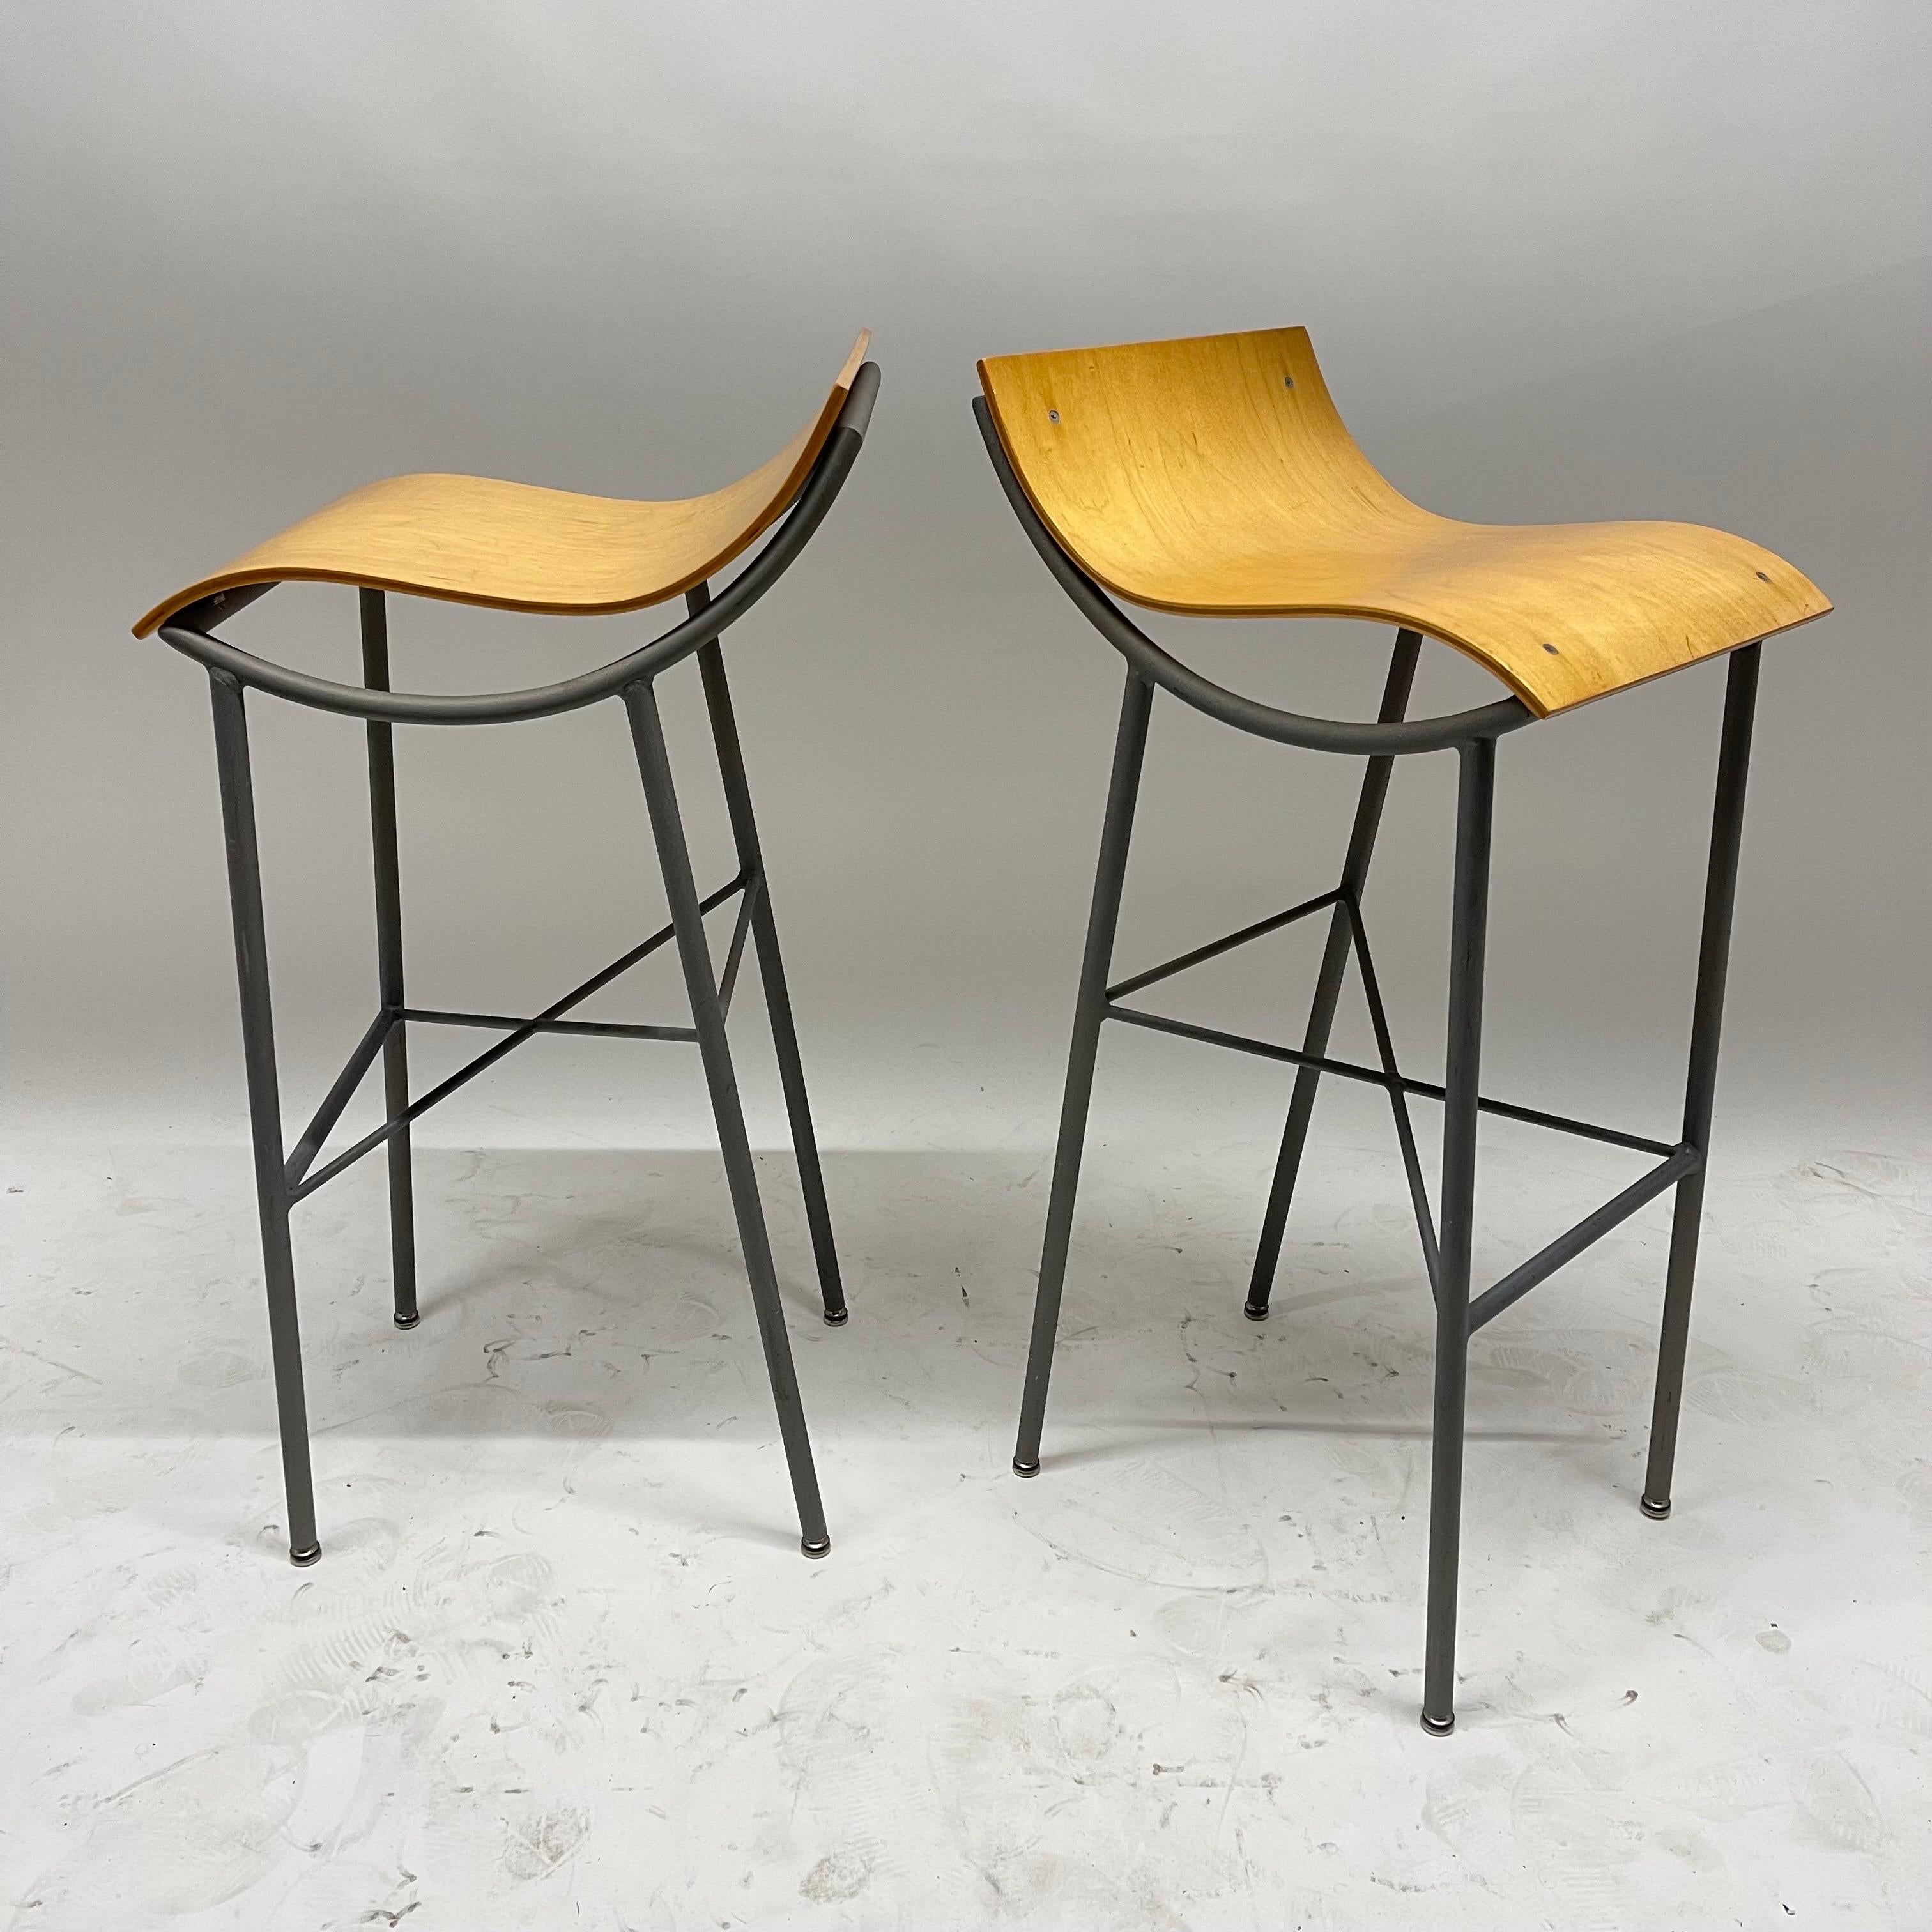 Italian Pair of Post Modern Sculptural Steel and Bent Plywood Bar Stools, circa 1980s For Sale